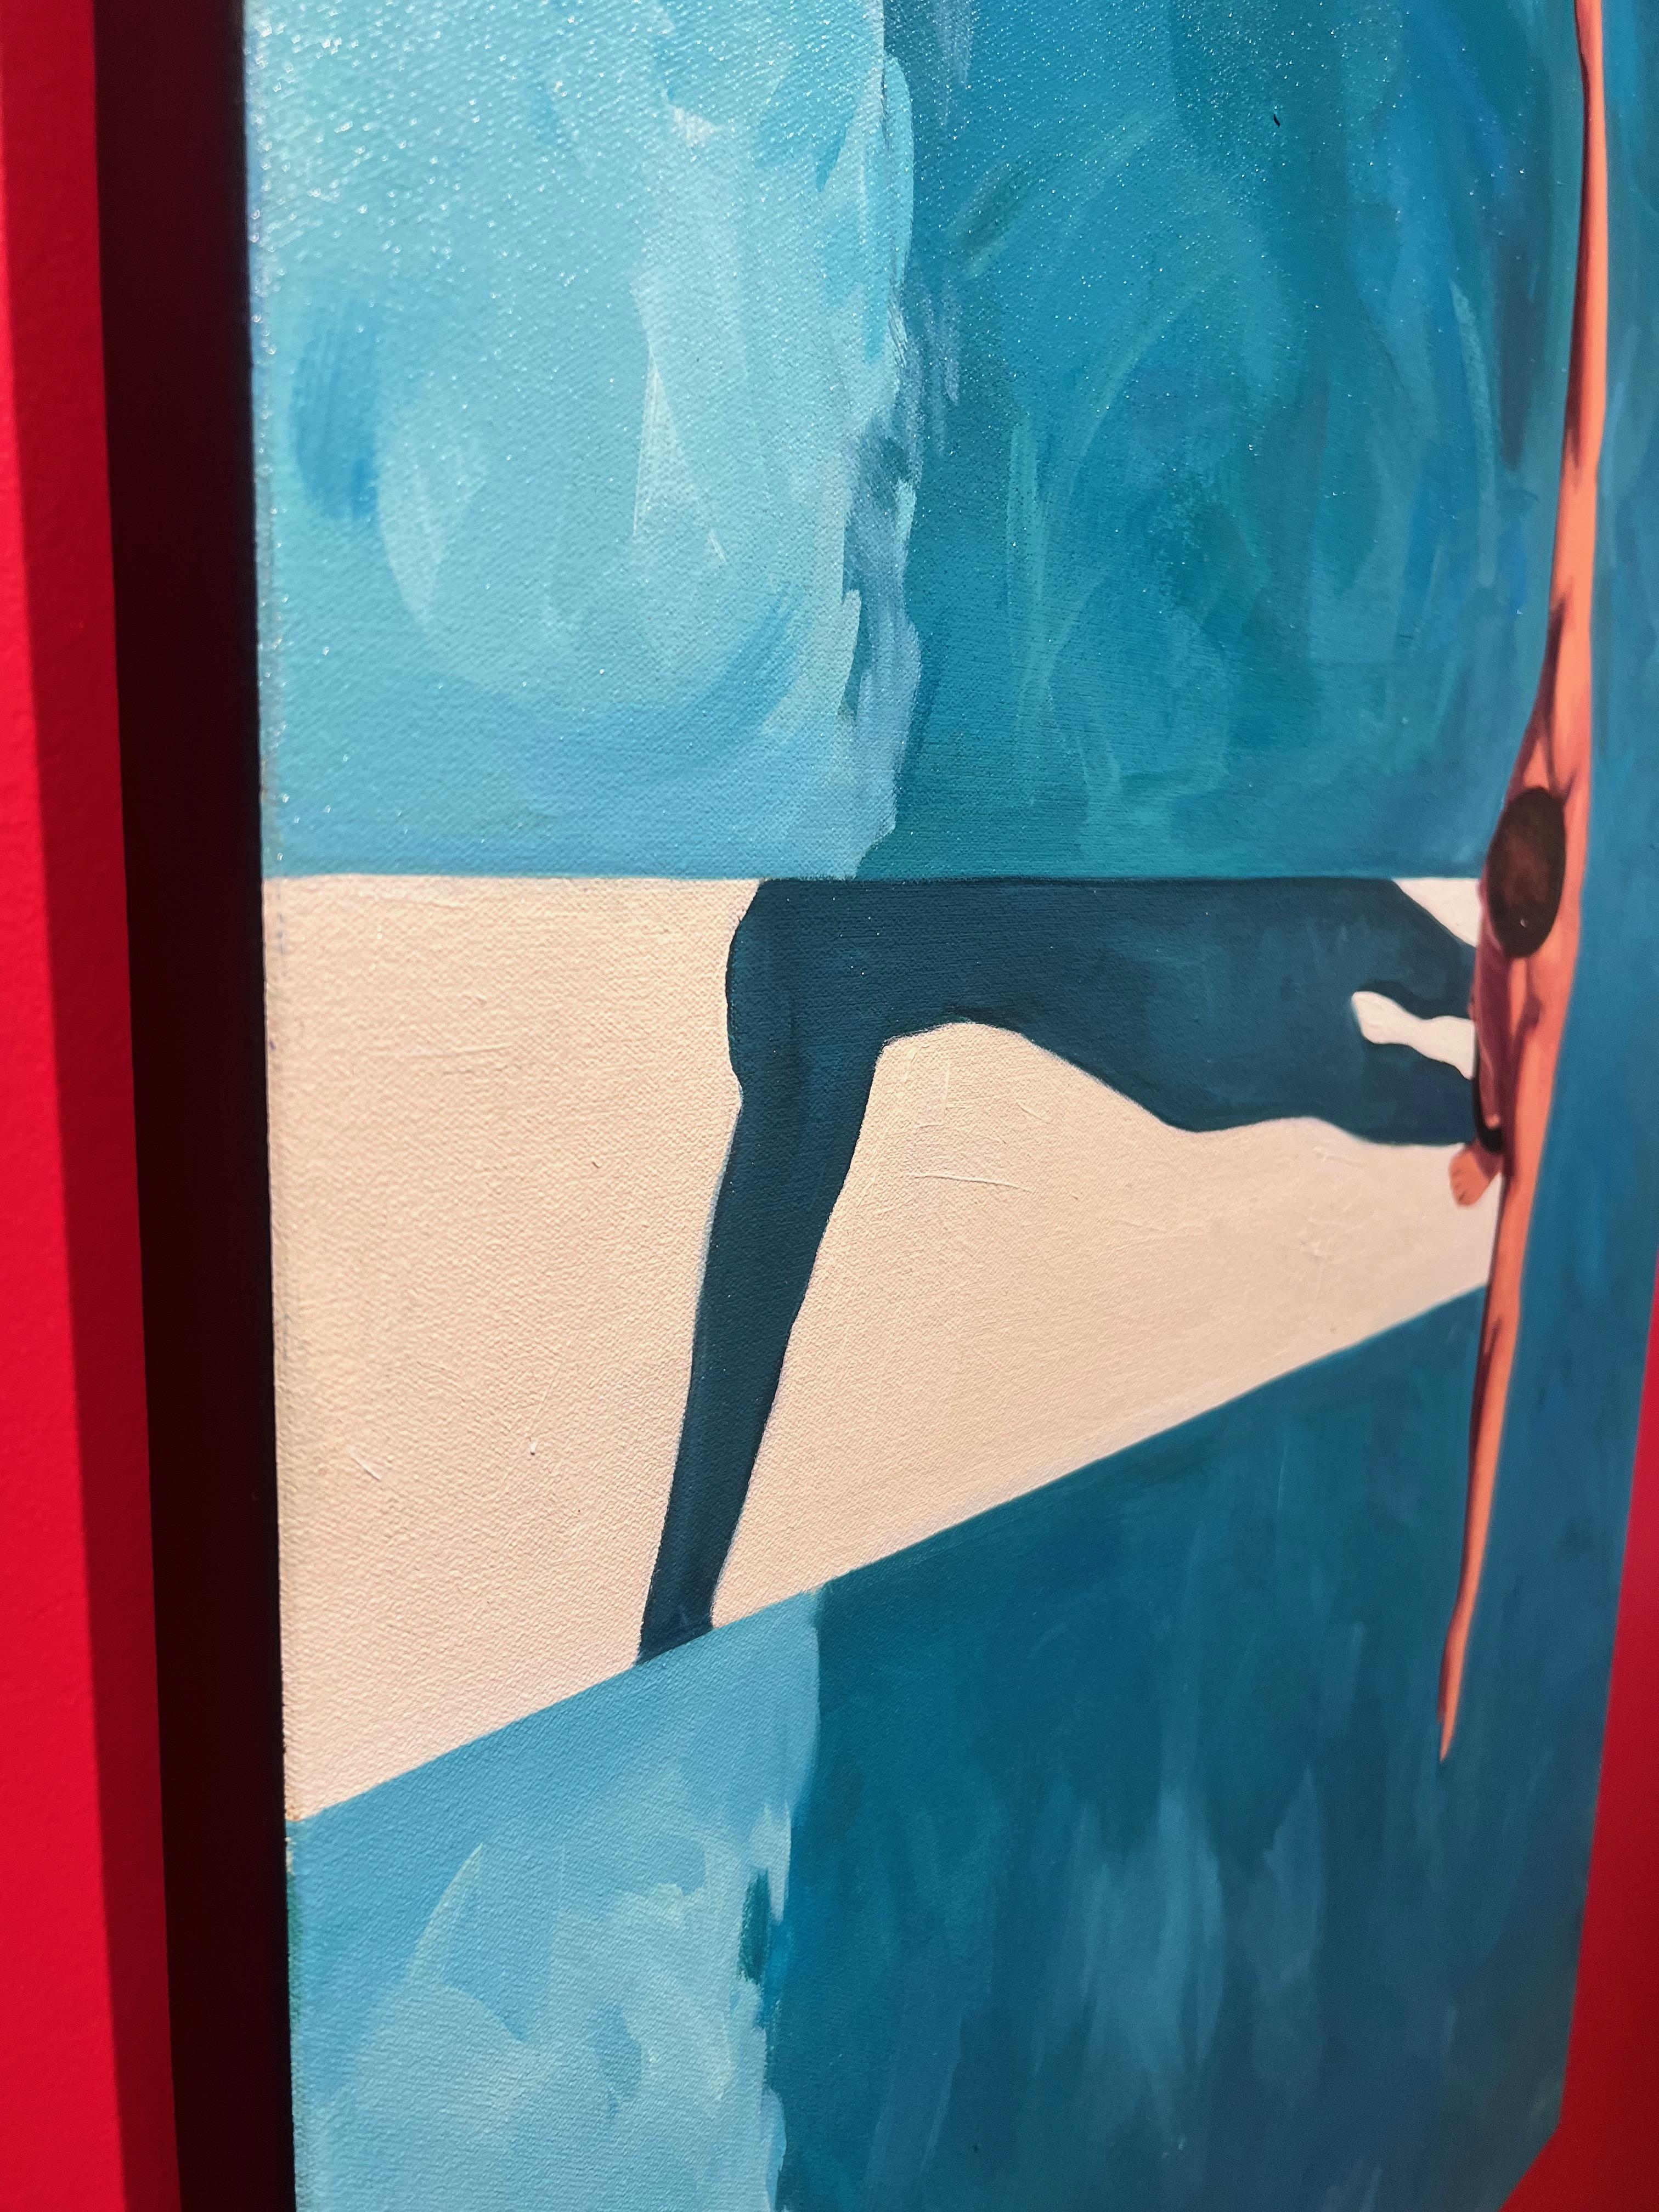 In her paintings, Tracey Sylvester Harris presents a dazzling, iconic vision of the female form that merges the past with the present. The paintings speak to the central issues of human existence- desire and loss, impermanence and beauty, and the